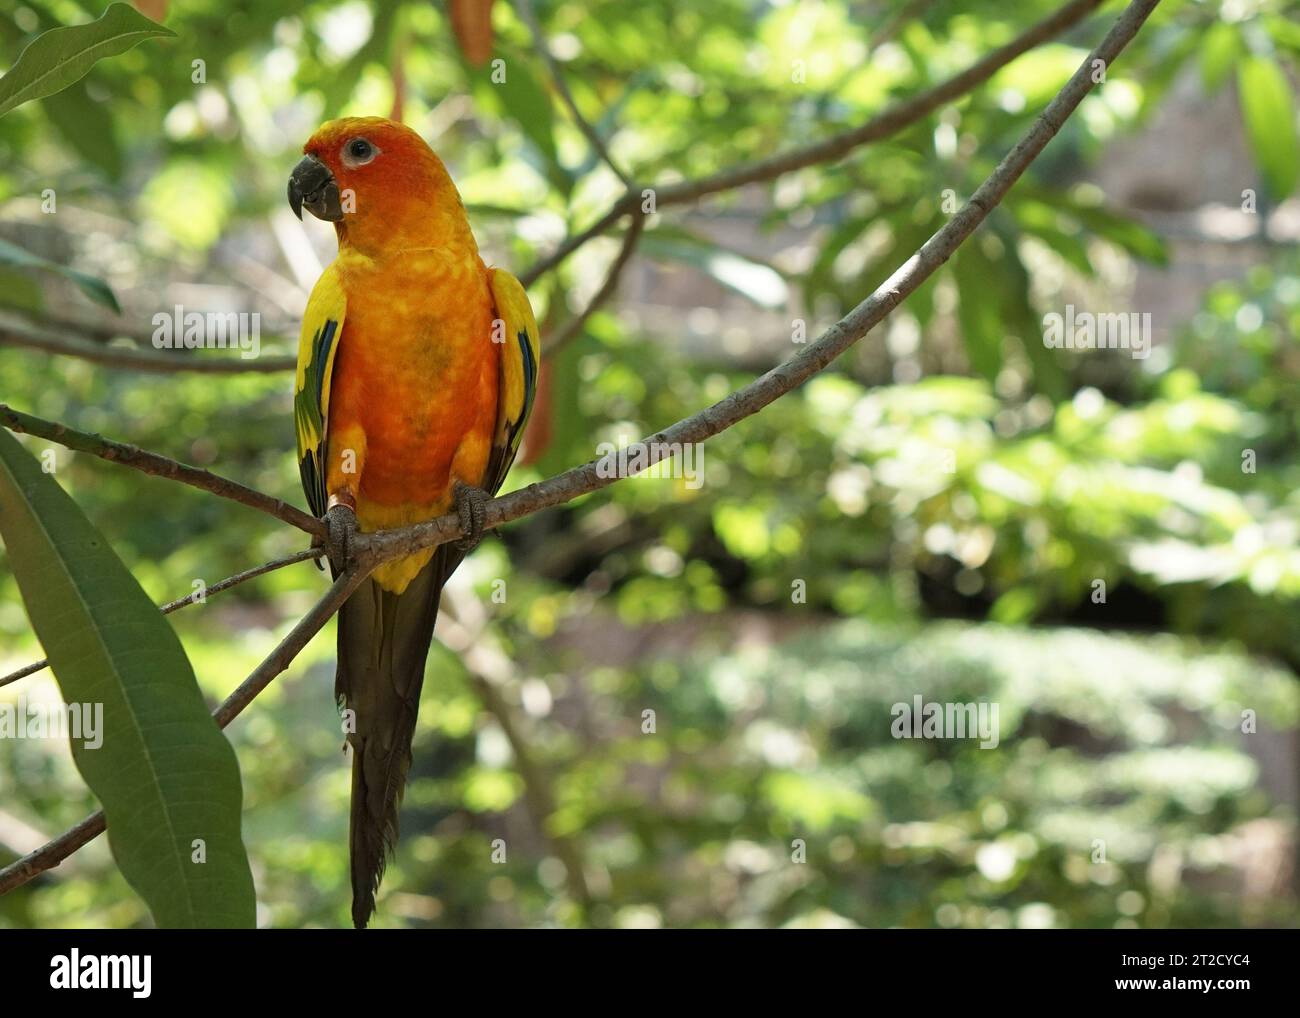 a yellow sun conure bird perched on a tree branch, in large botanical garden inside aviary bird park. Stock Photo